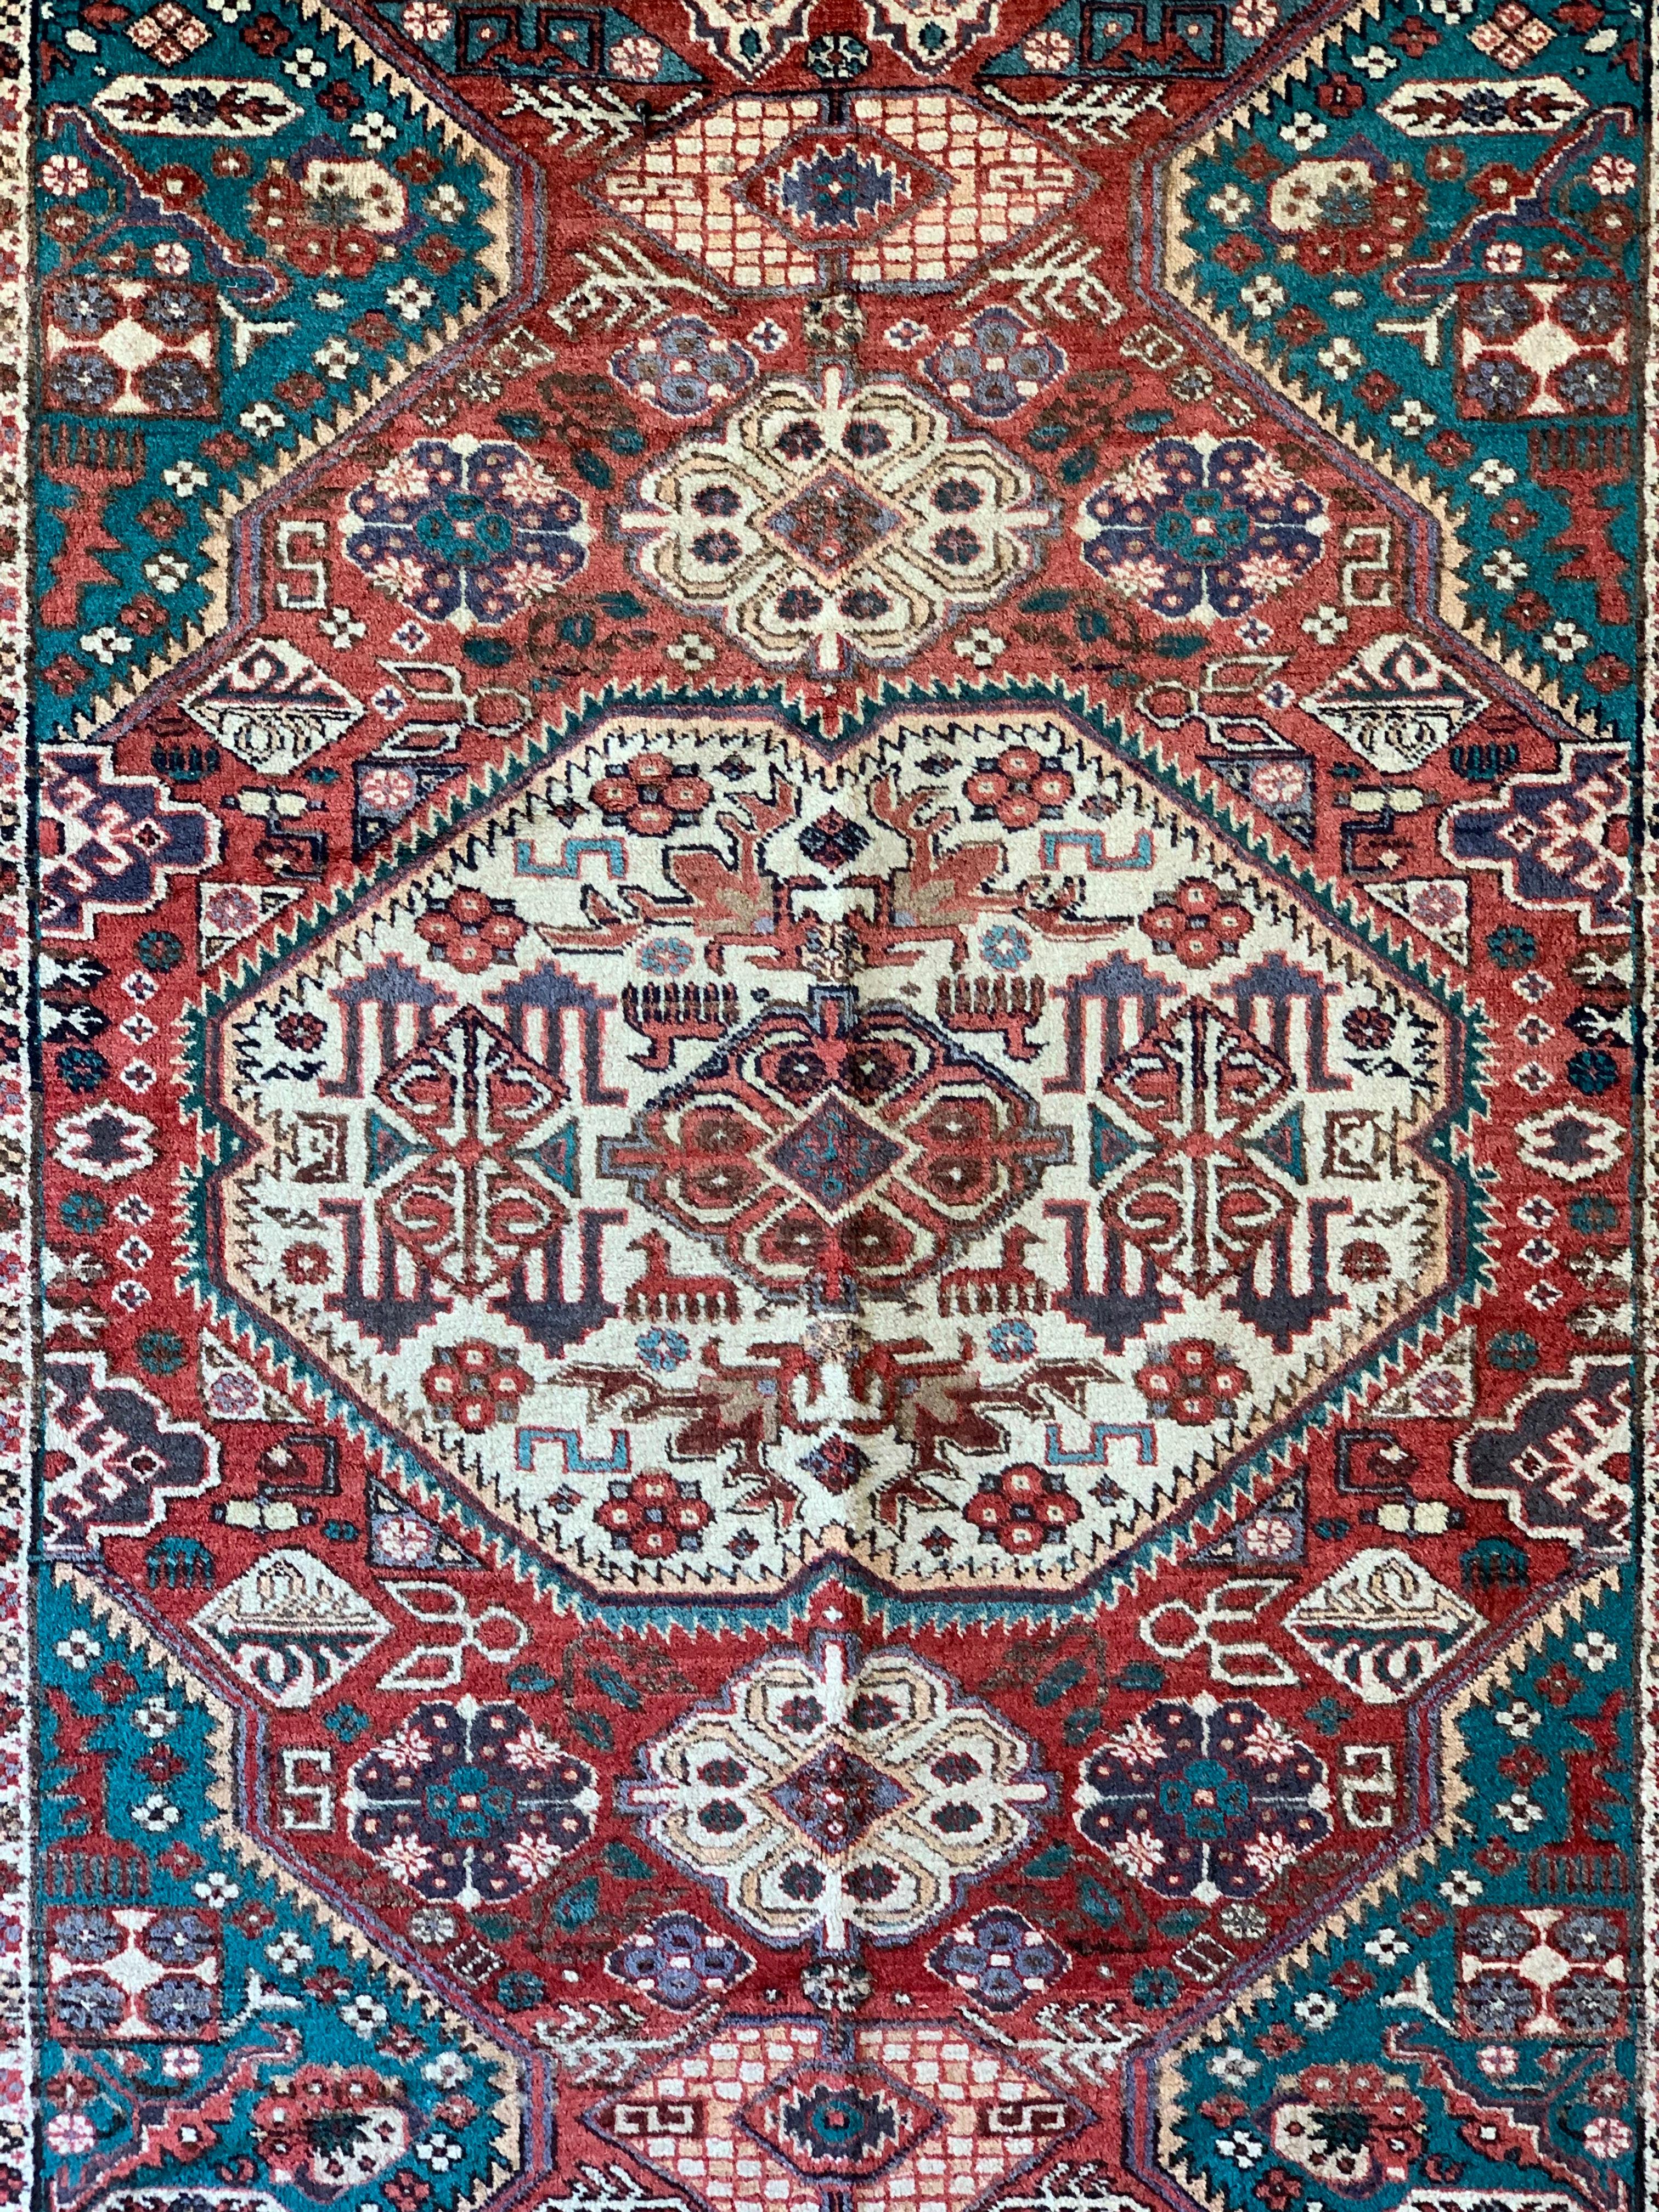 This is a vintage hand-knotted rug in the style of Chajli Kazak, made in Derbent, the southwestern edge of Russia near Azerbaijan, circa mid-1960s. It is wool knot on cotton warp and weft, and is approximately 5’4 x 9 ft. It is a beautiful rug in